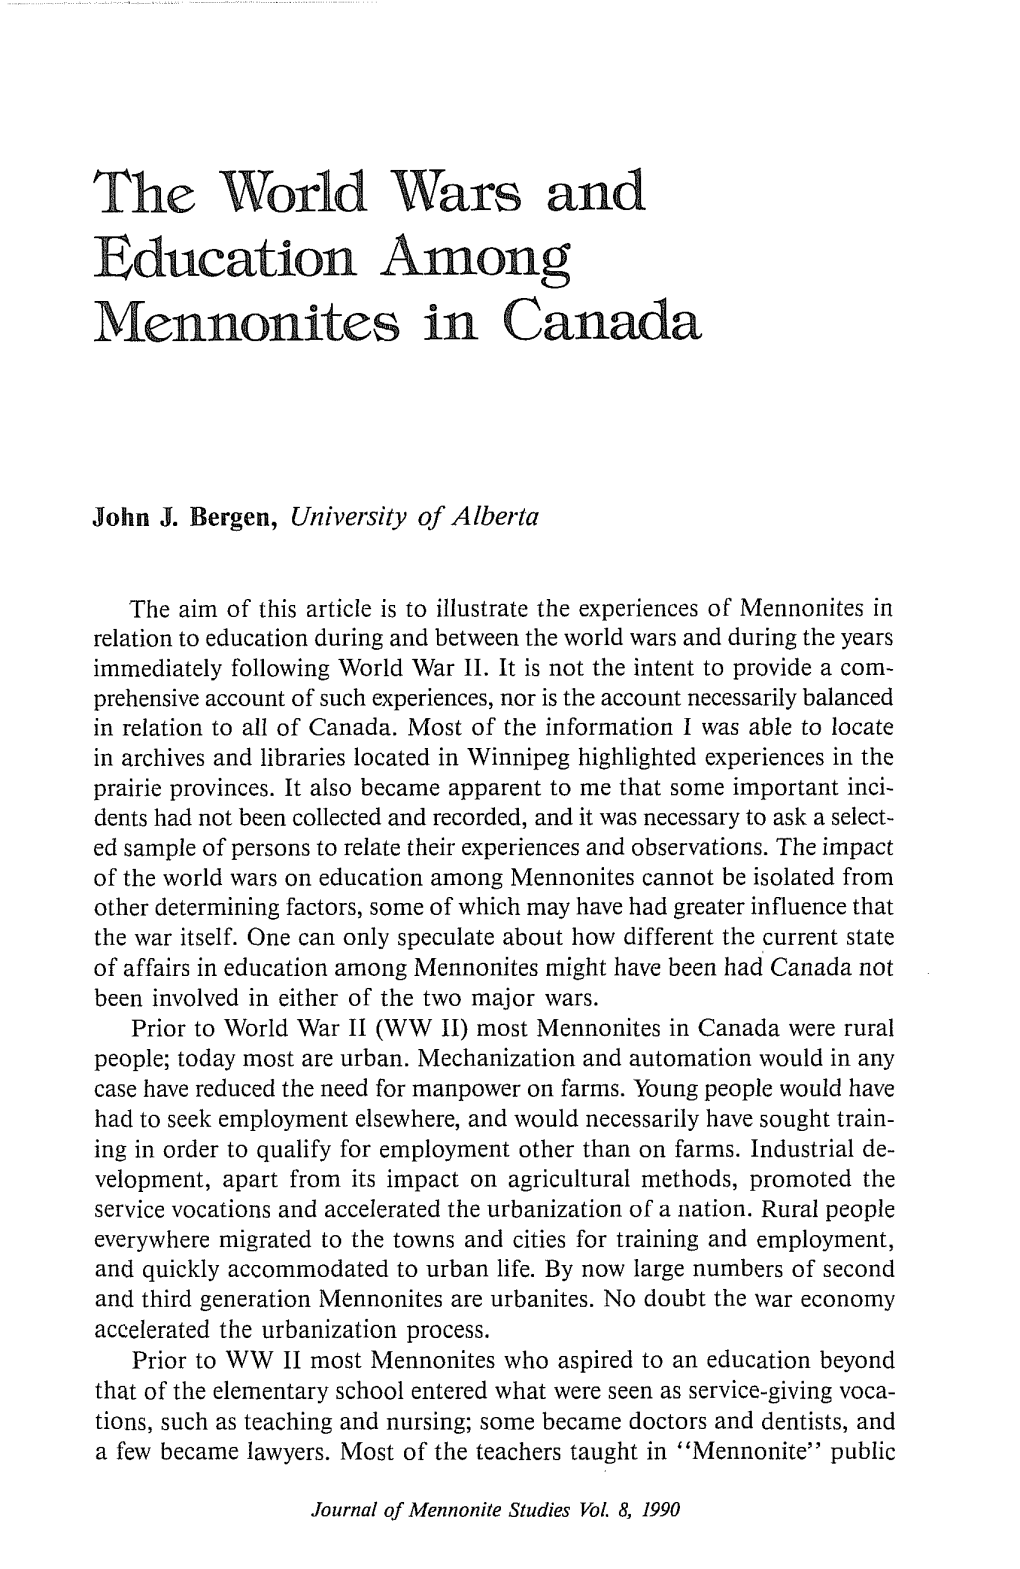 The World Wars and Education Among Mennonites in Canada